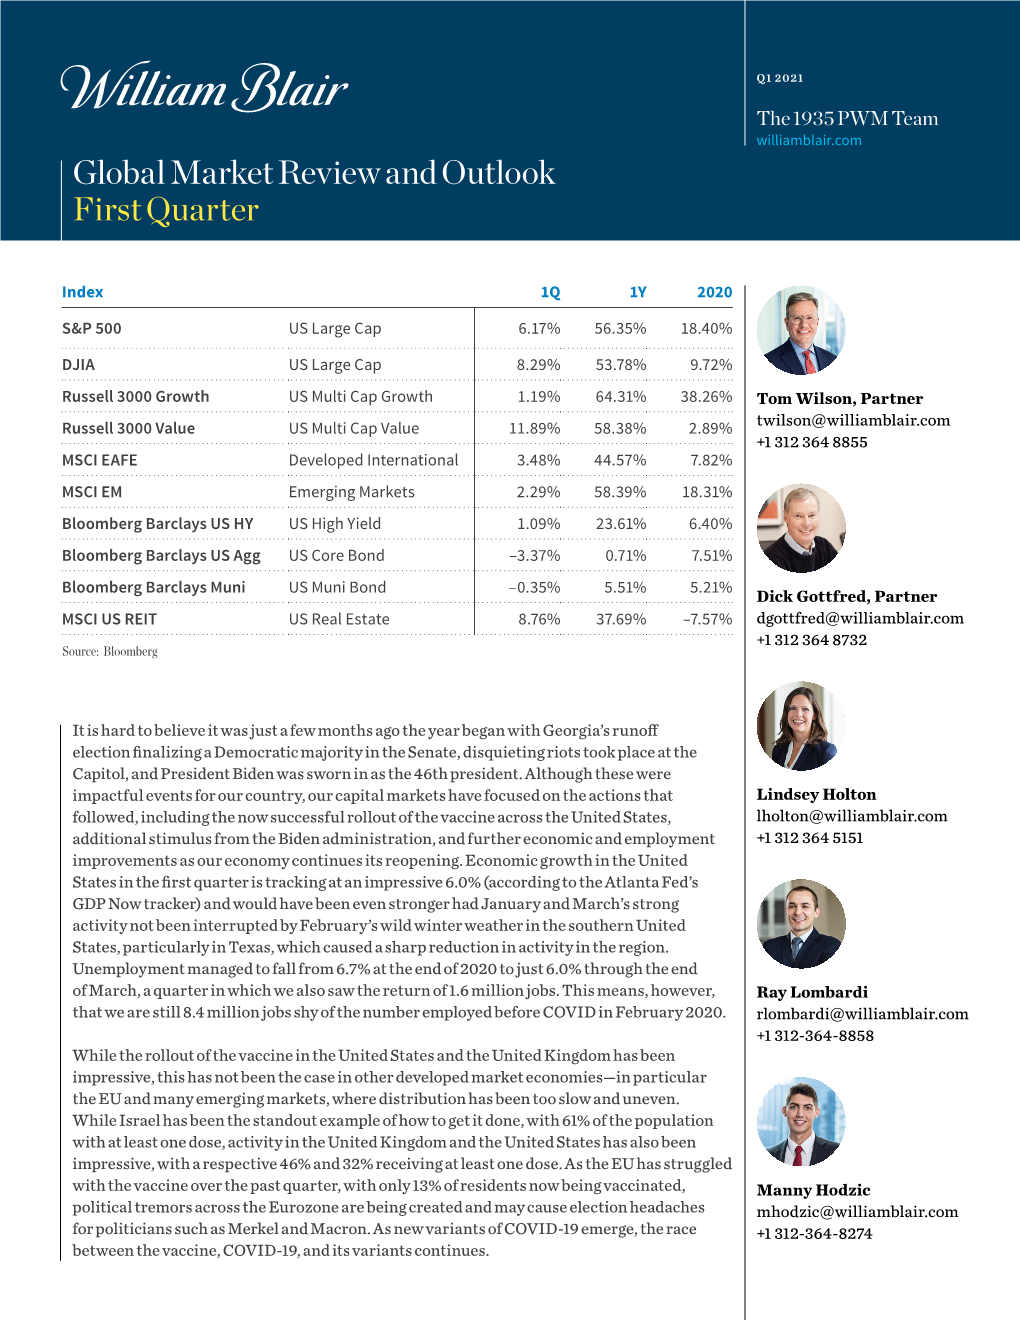 Global Market Review and Outlook First Quarter